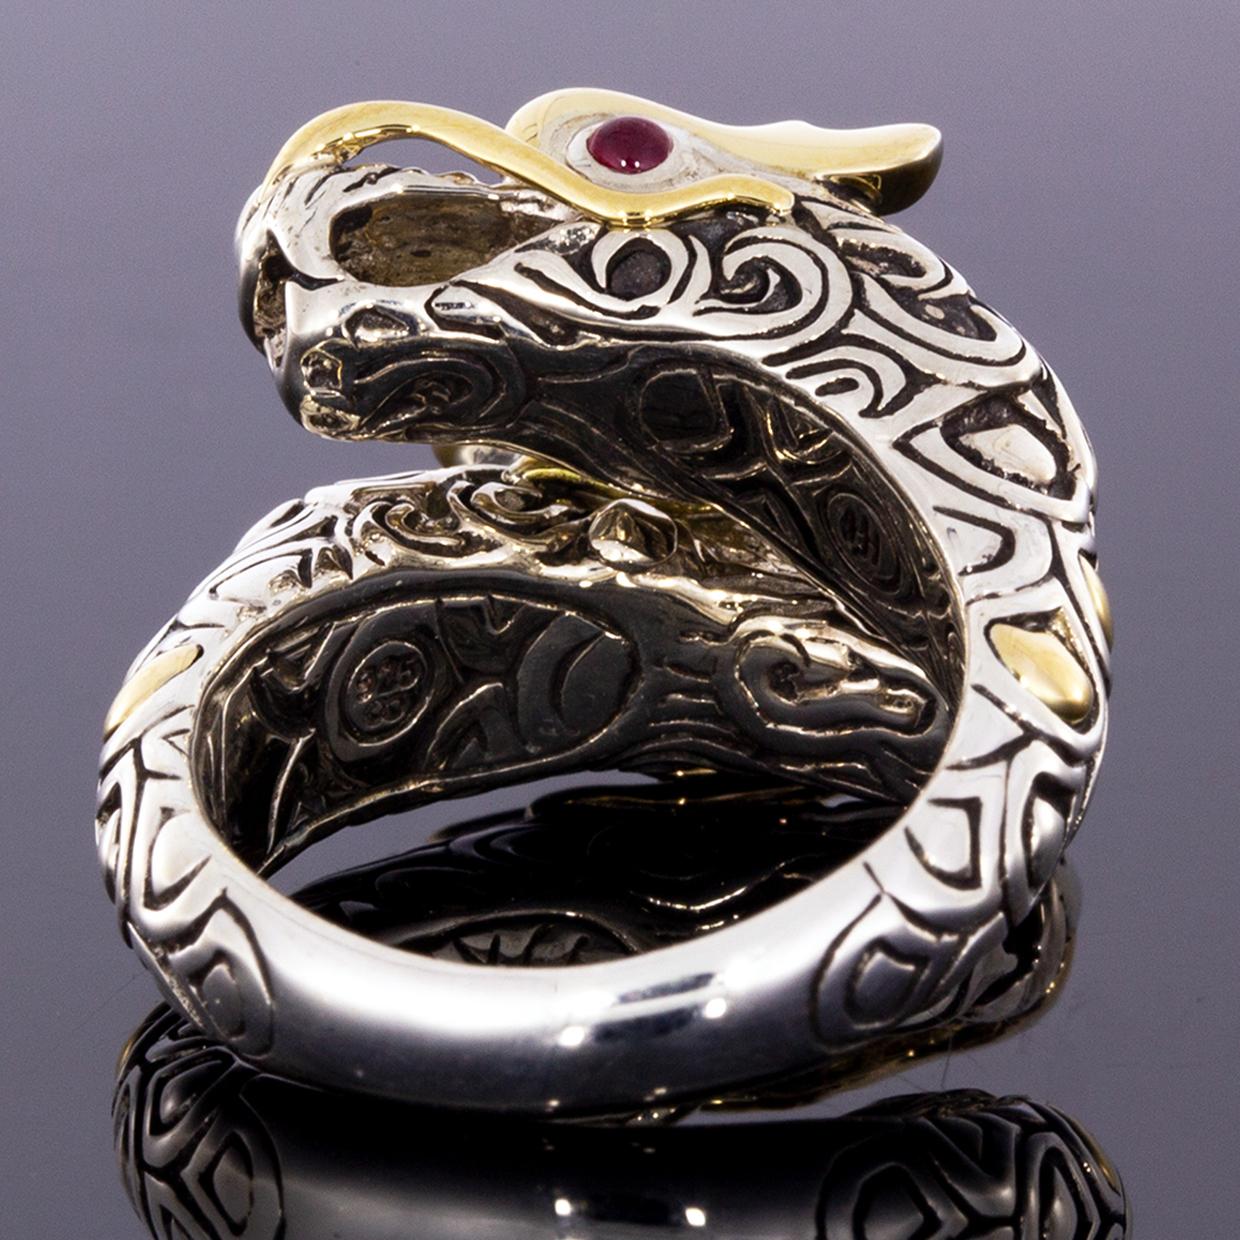 Item Details:
Estimated Retail - $1,495.00
Brand - John Hardy
Collection - Naga
Metal - 18K Yellow Gold & 925 Sterling Silver
Ring Size - 7.00
Sizable - Limited
Width - 16.50mm

Stone 1 Information:
Stone Type - Ruby
Stone Shape - Cabochon
Count -